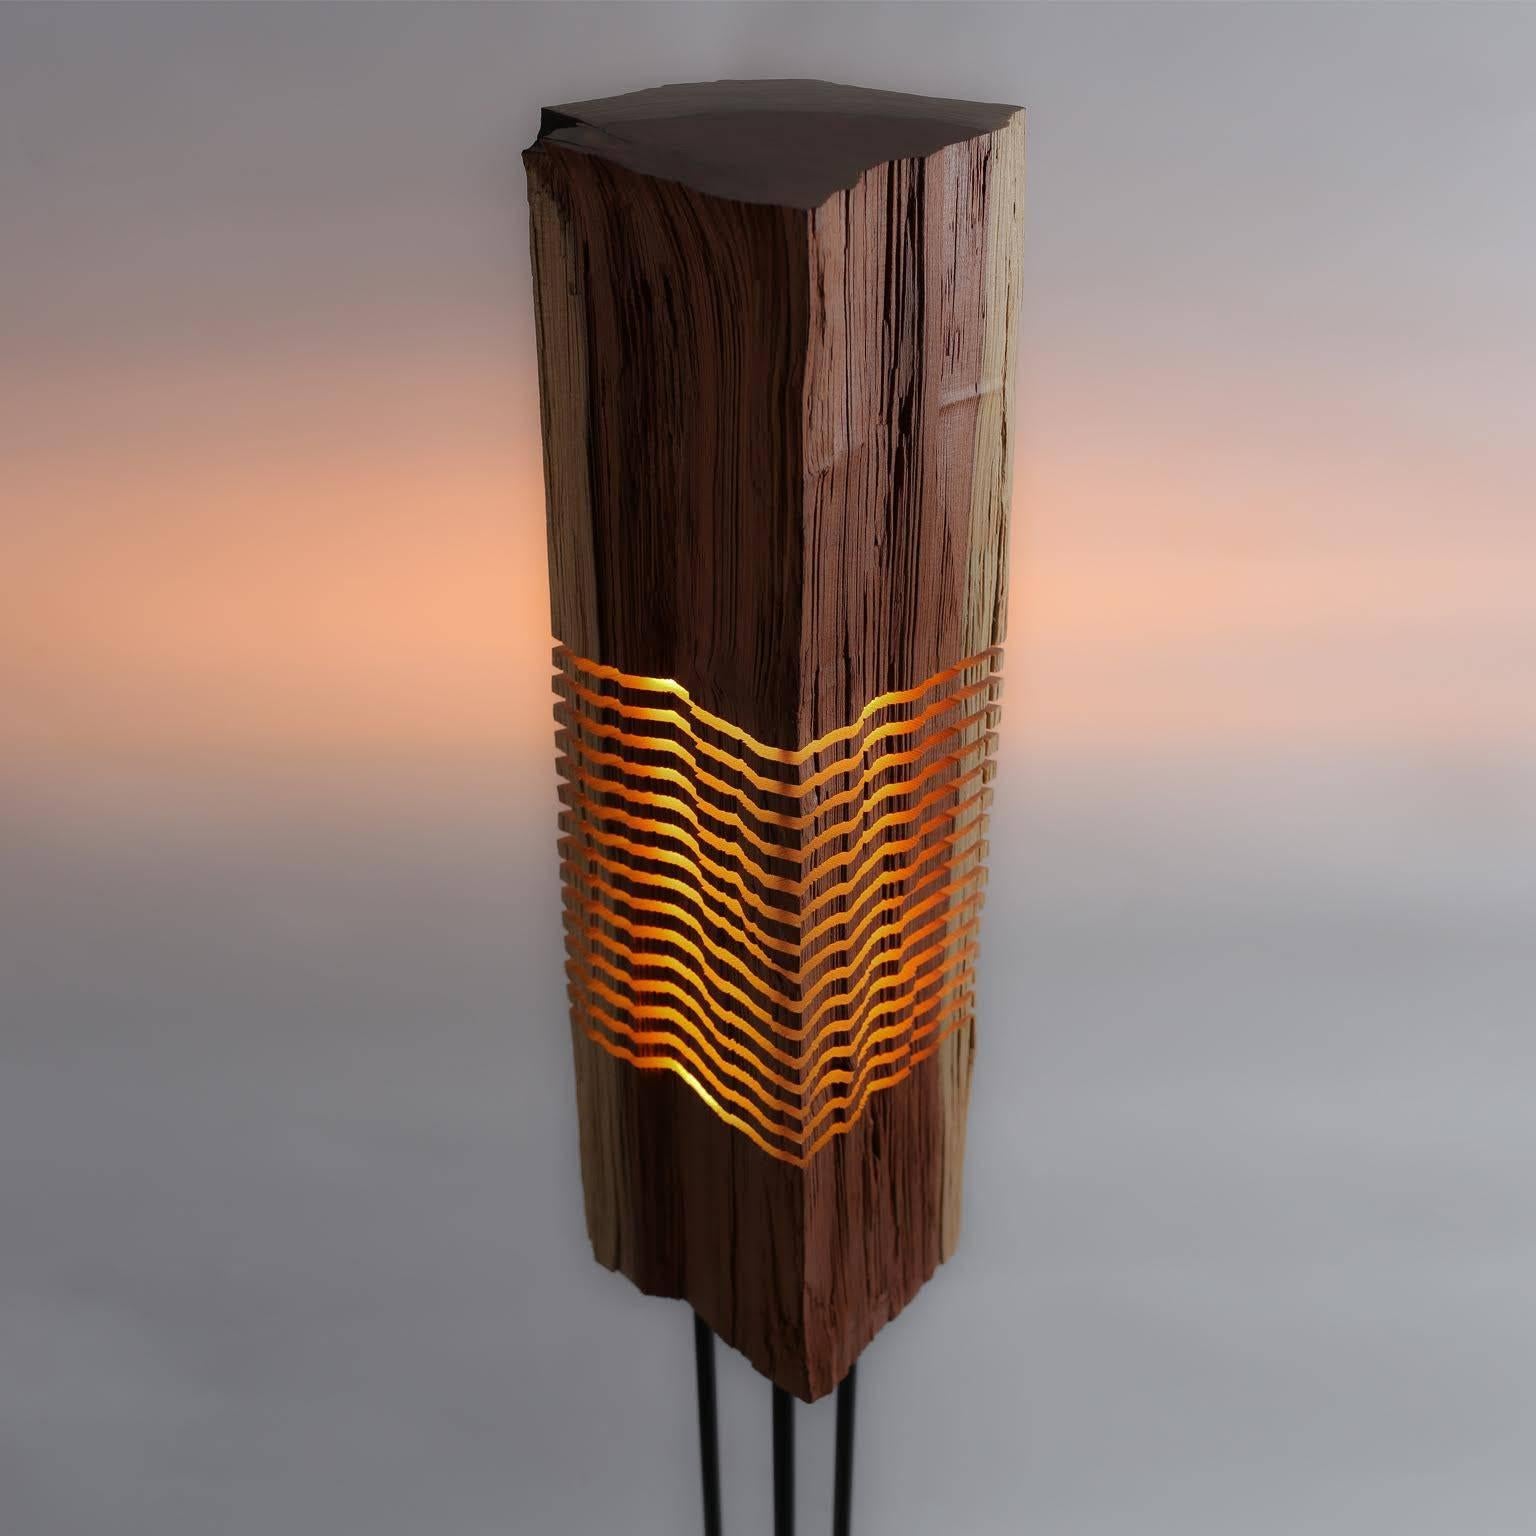 Split grain redwood floor light sculpture. This one of a kind light sculpture is hand made by 20th century artist Paul Foeckler from a reclaimed redwood trunk with a hollowed core that is illuminated with a built-in dimmable LED bulb and mounted on